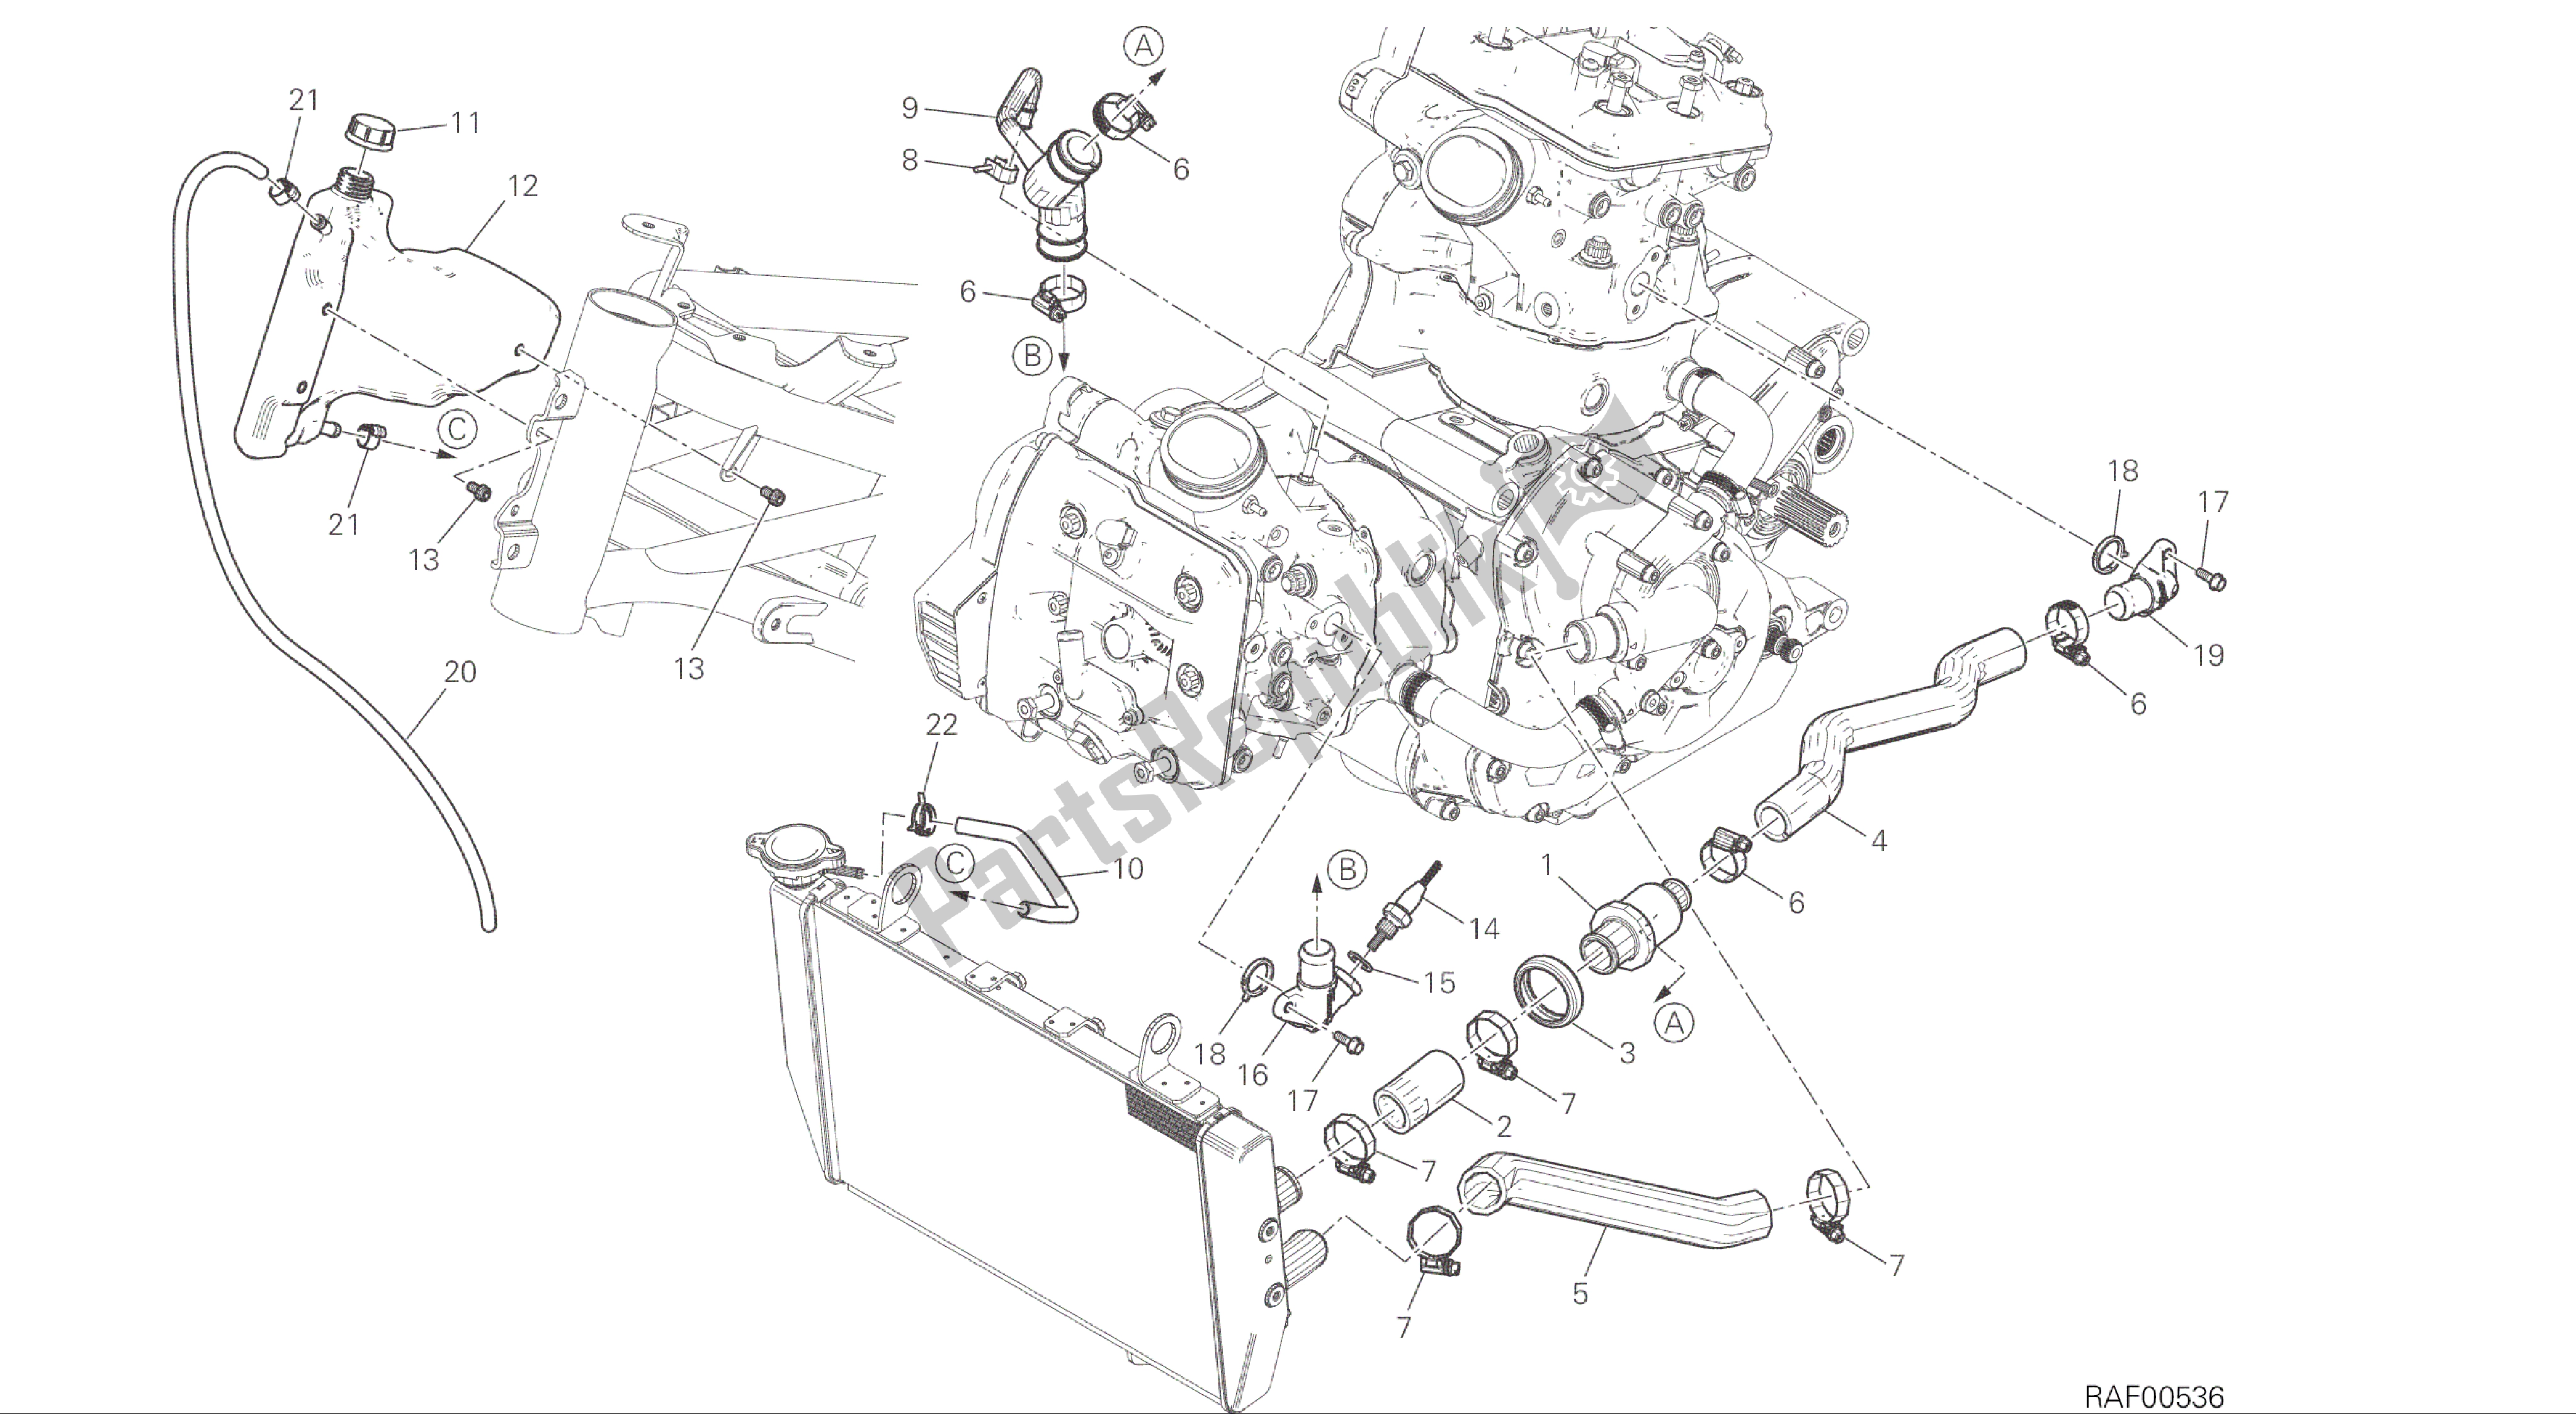 All parts for the Drawing 031 - Cooling Circuit [mod:ms1200;xst:aus,eur,fra,jap]group Frame of the Ducati Multistrada 1200 2015